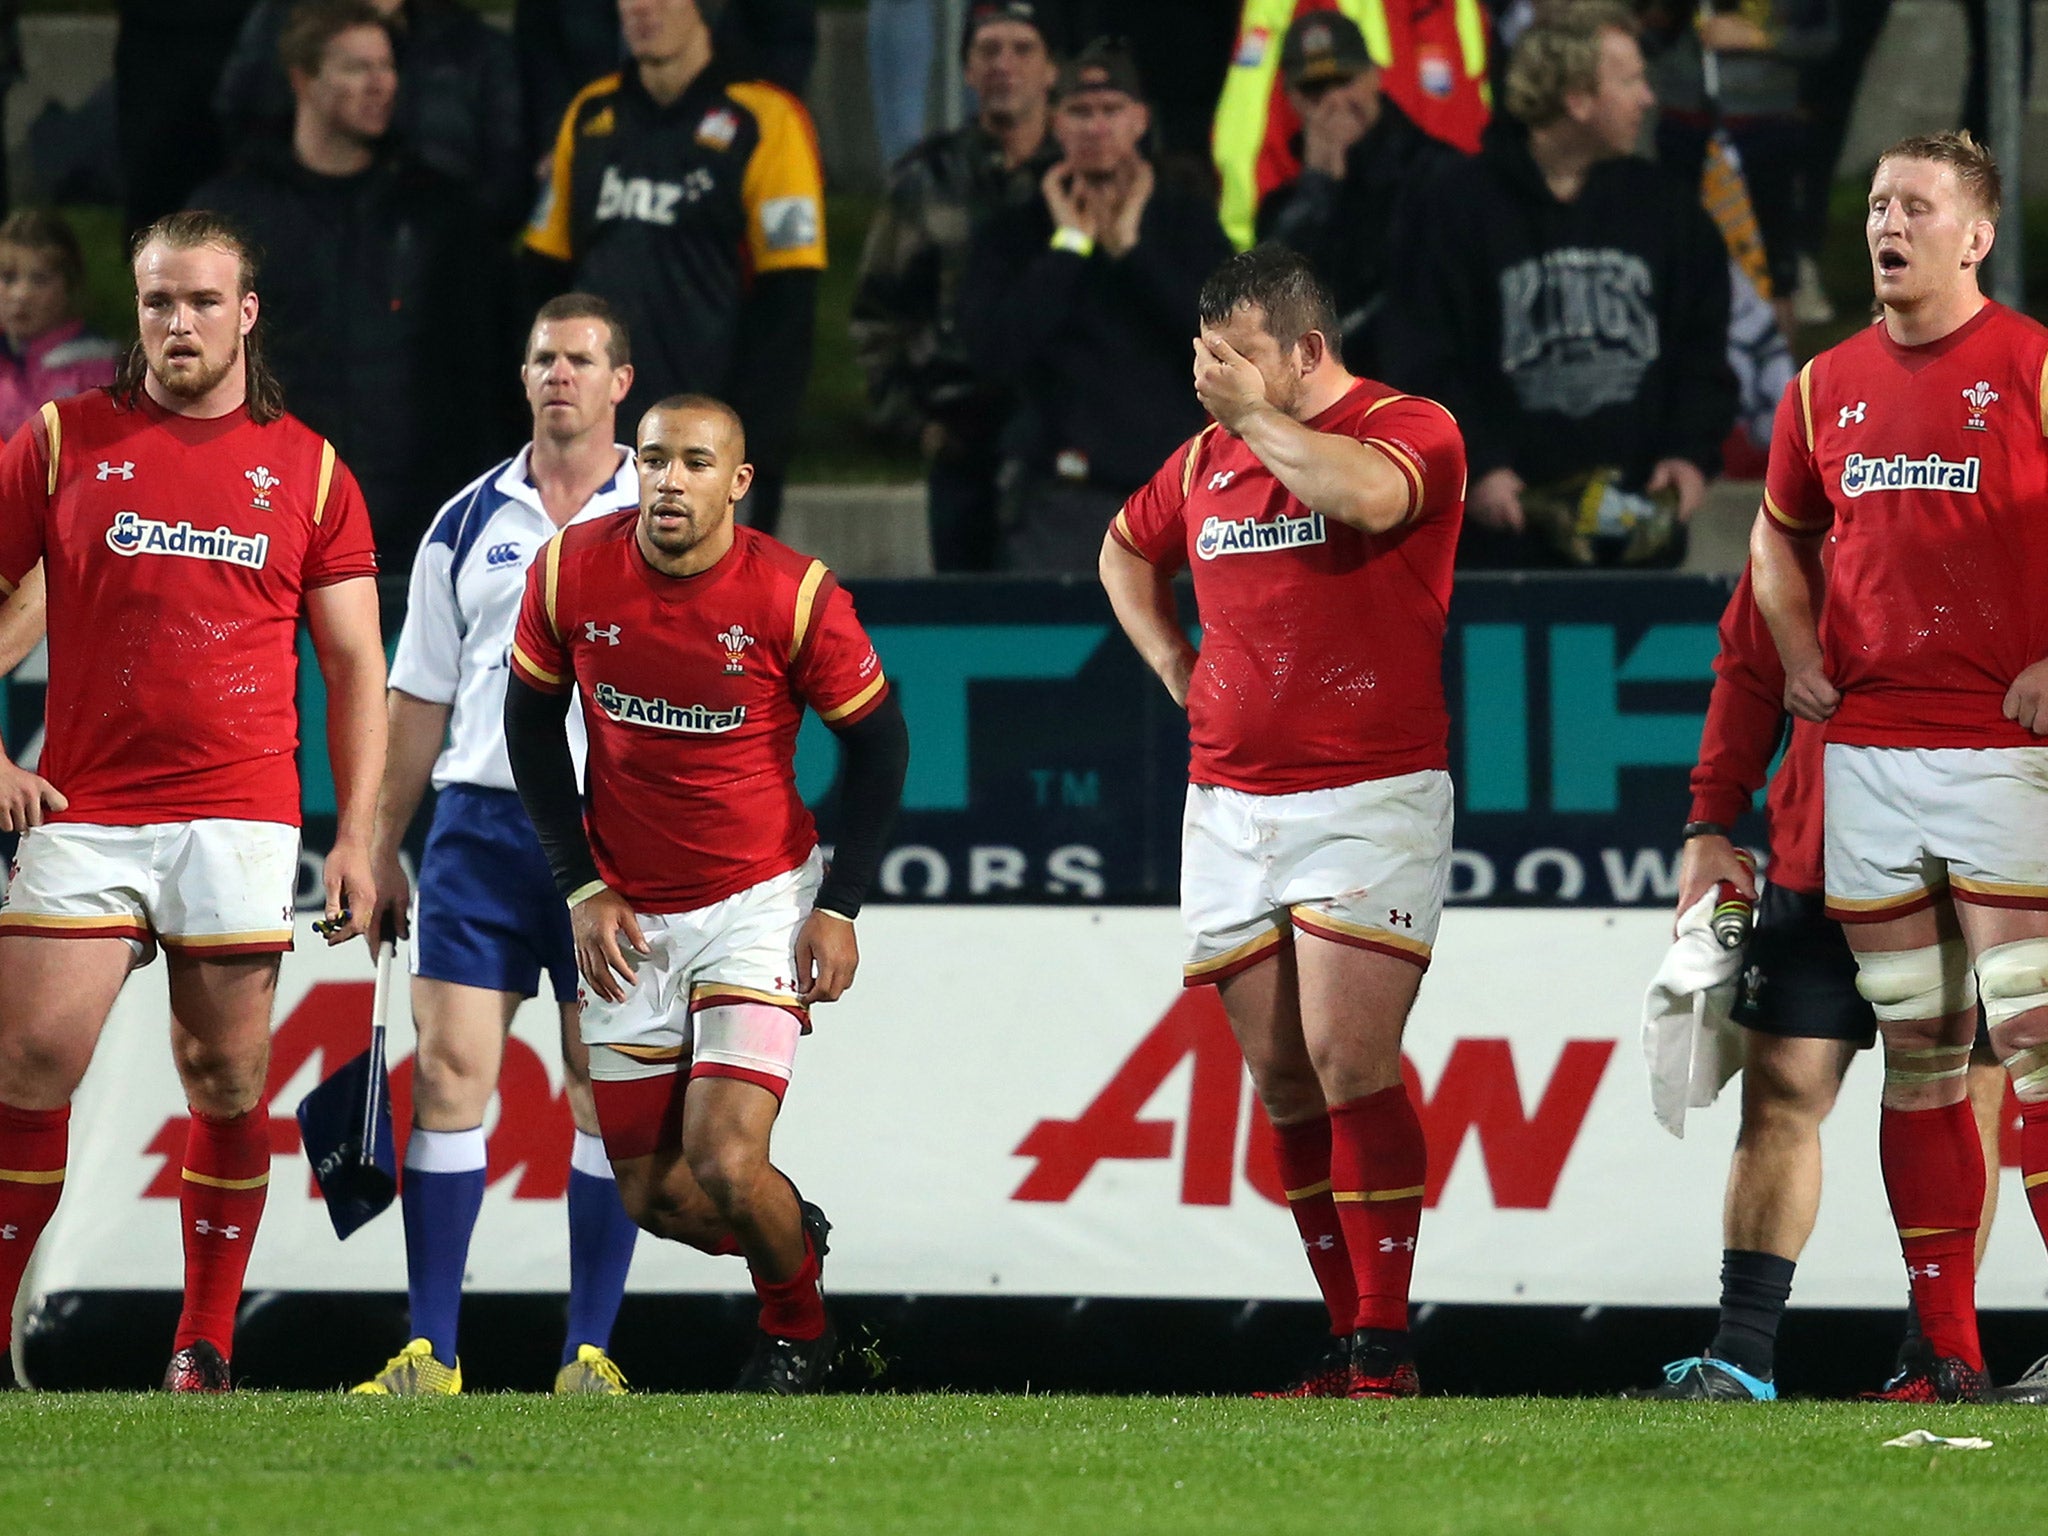 Wales players appear dejected after suffering a heavy 40-7 defeat by the Chiefs